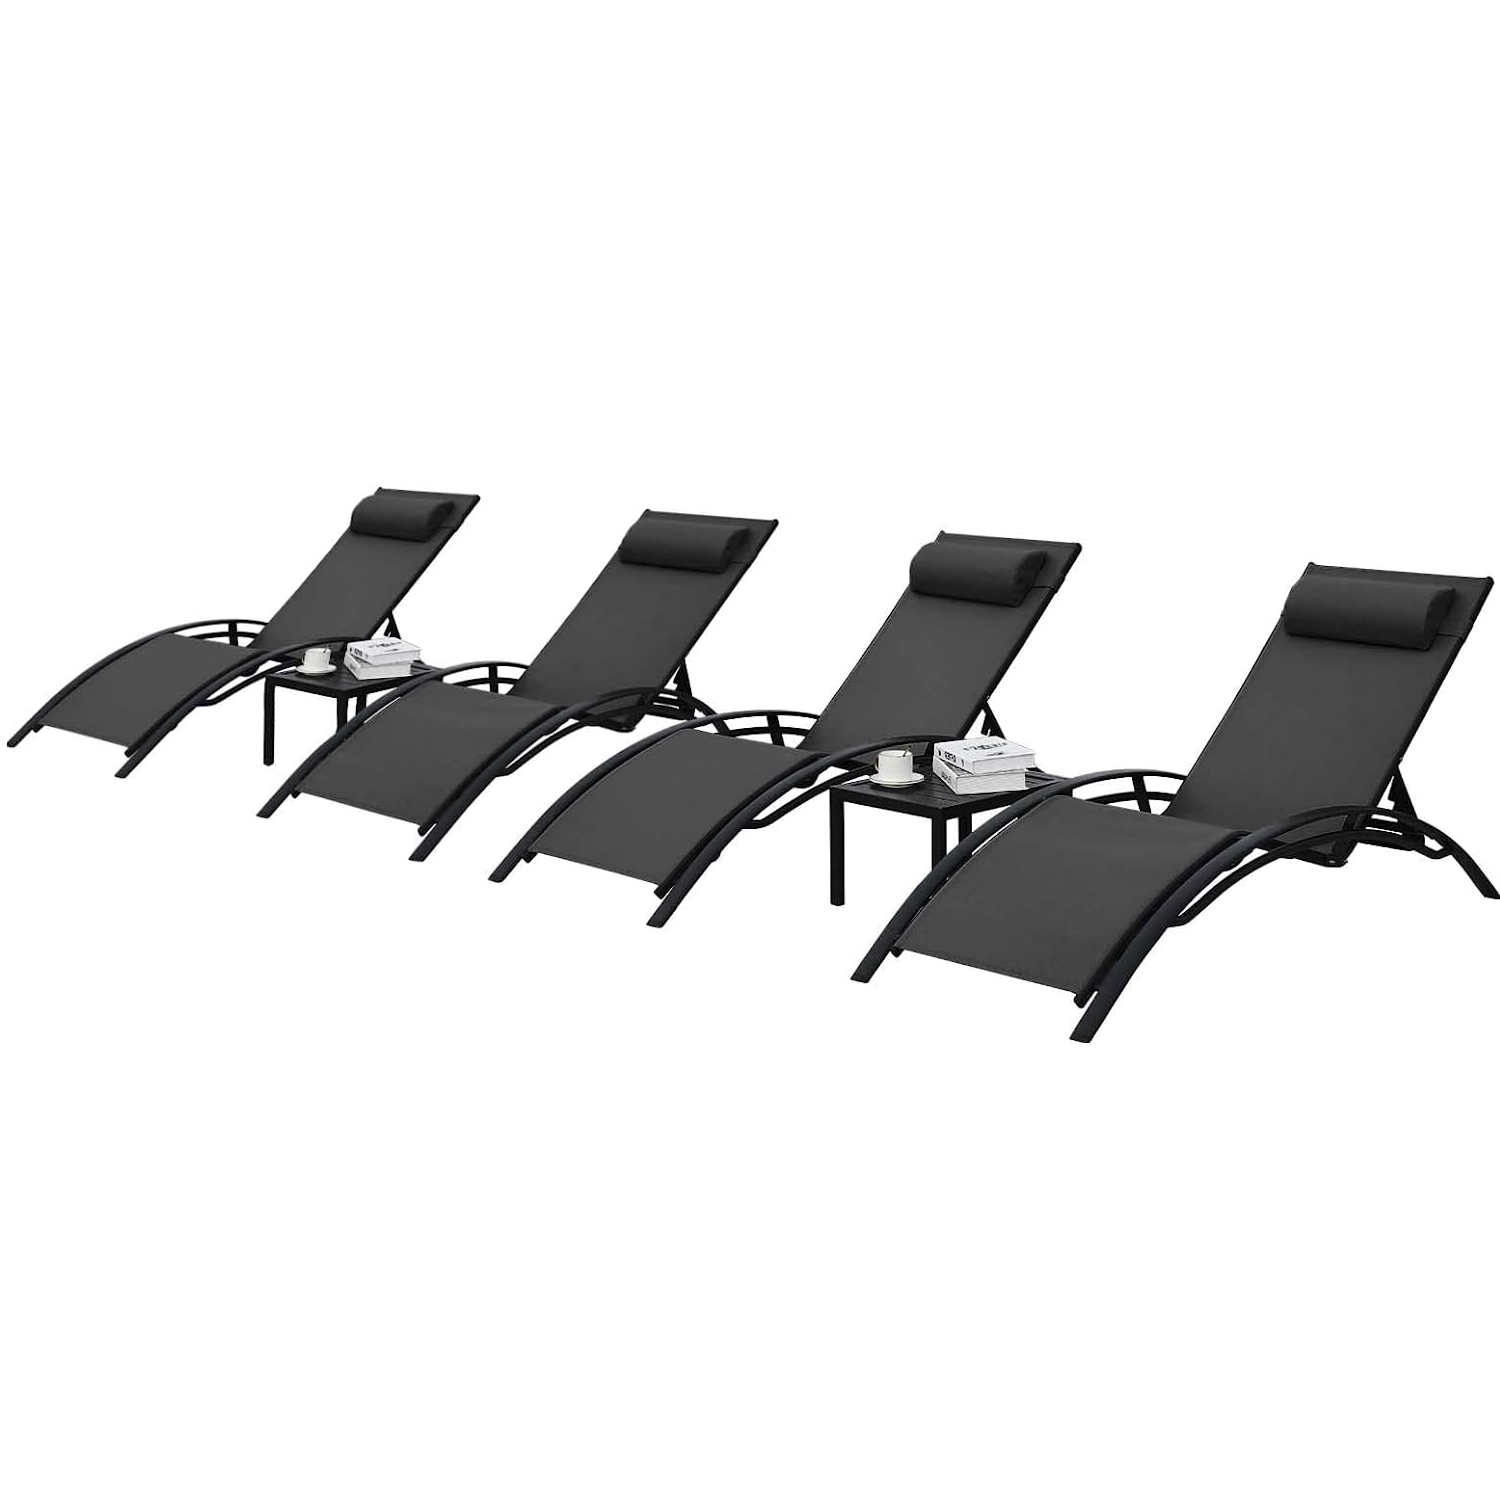 Pirecart Patio Lounge Chairs Set Outdoor Pool Recliner W/ 4 Chairs and 2 Tables - image 1 of 7